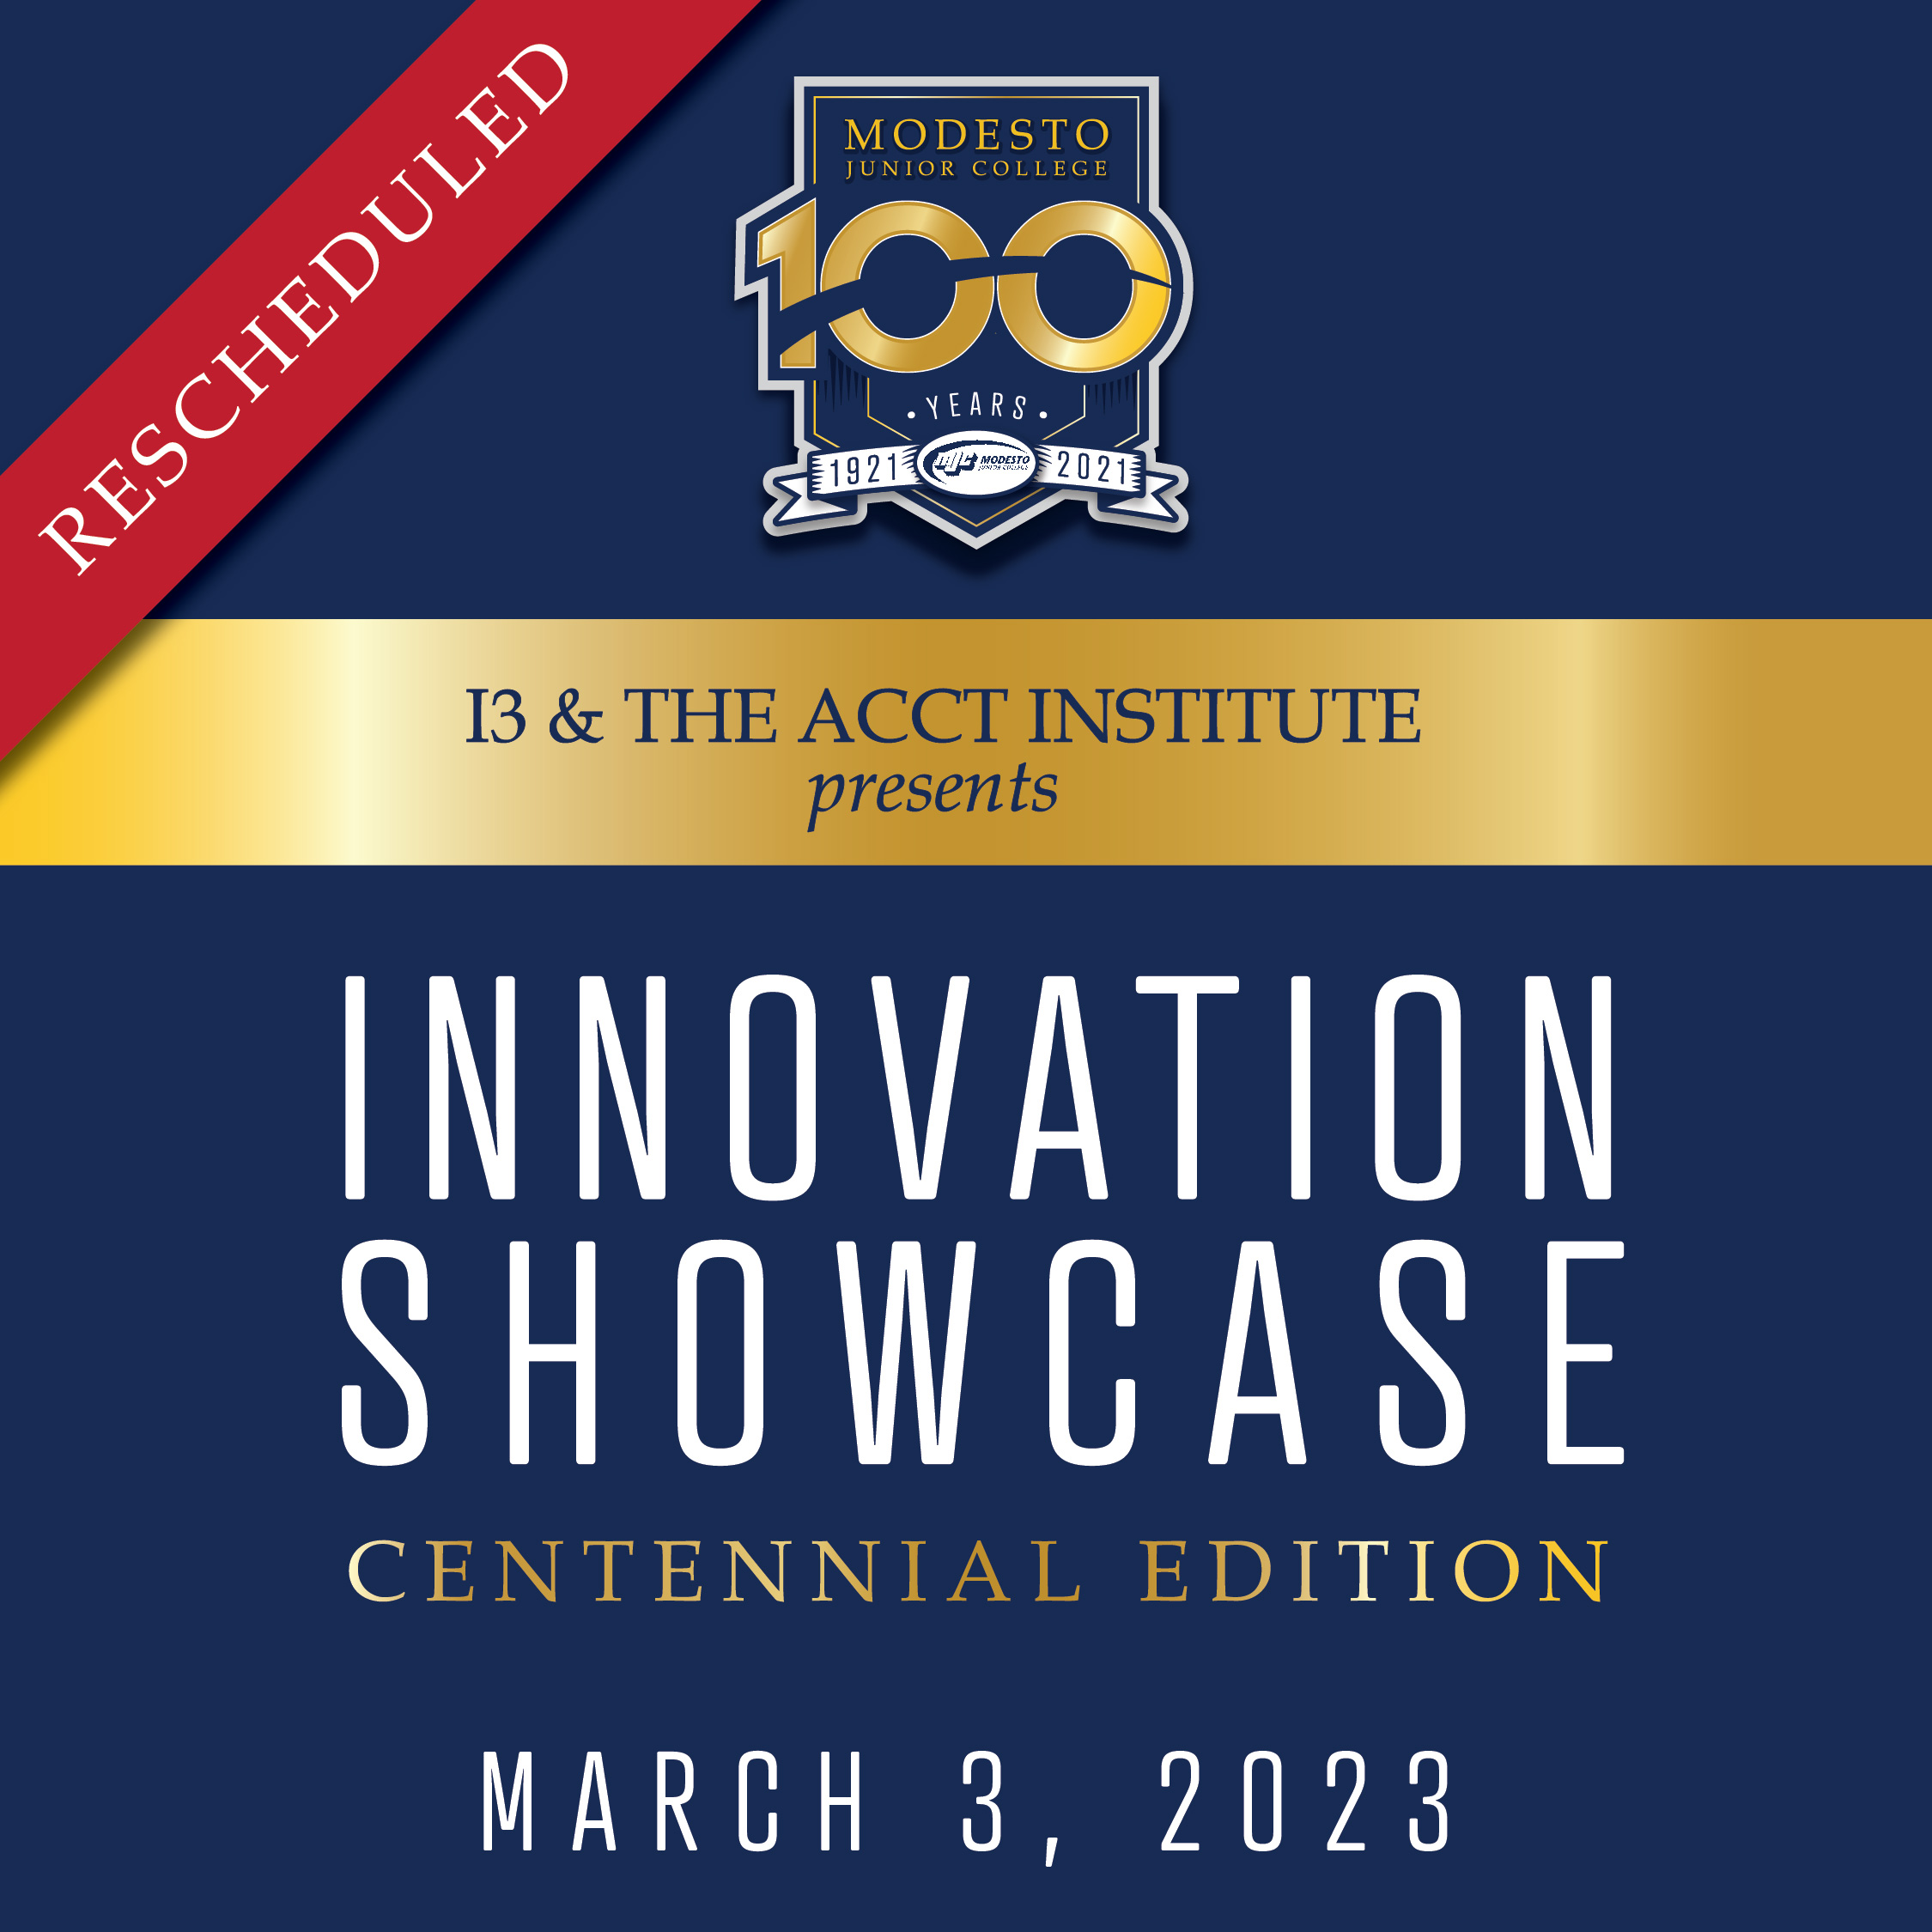 Innovation Showcase: Rescheduled to March 3, 2023